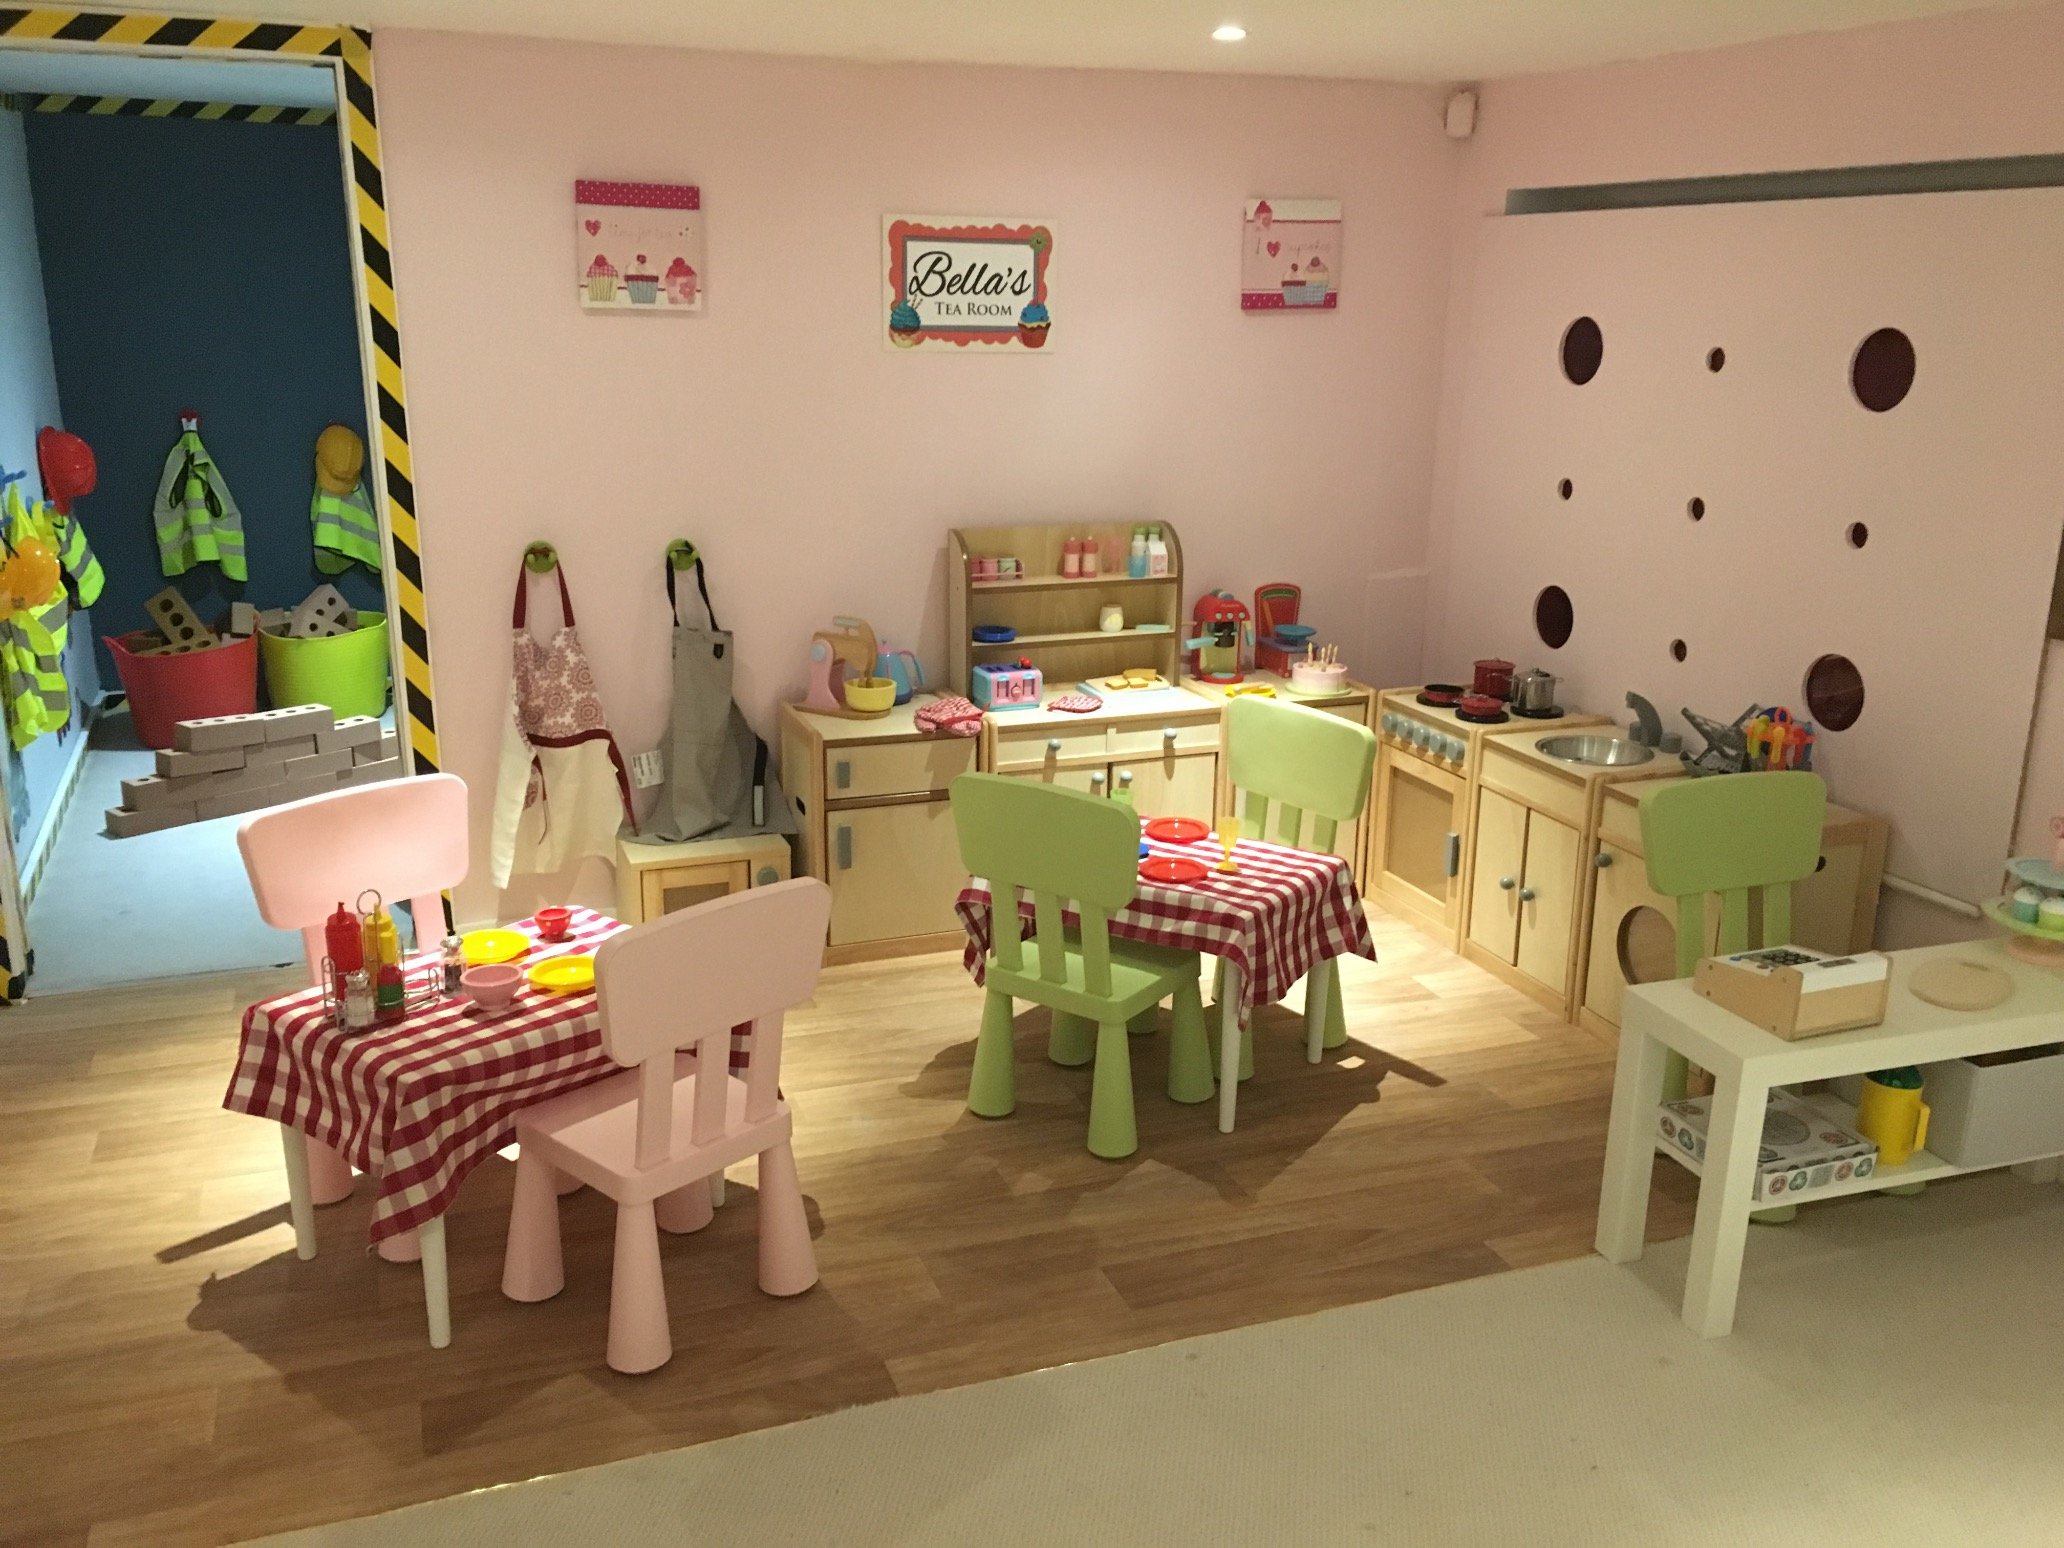 Little Lambs Softplay and Café Open 7 days a weekend at our New Venue in Coulsdon also offering Roleplay areas